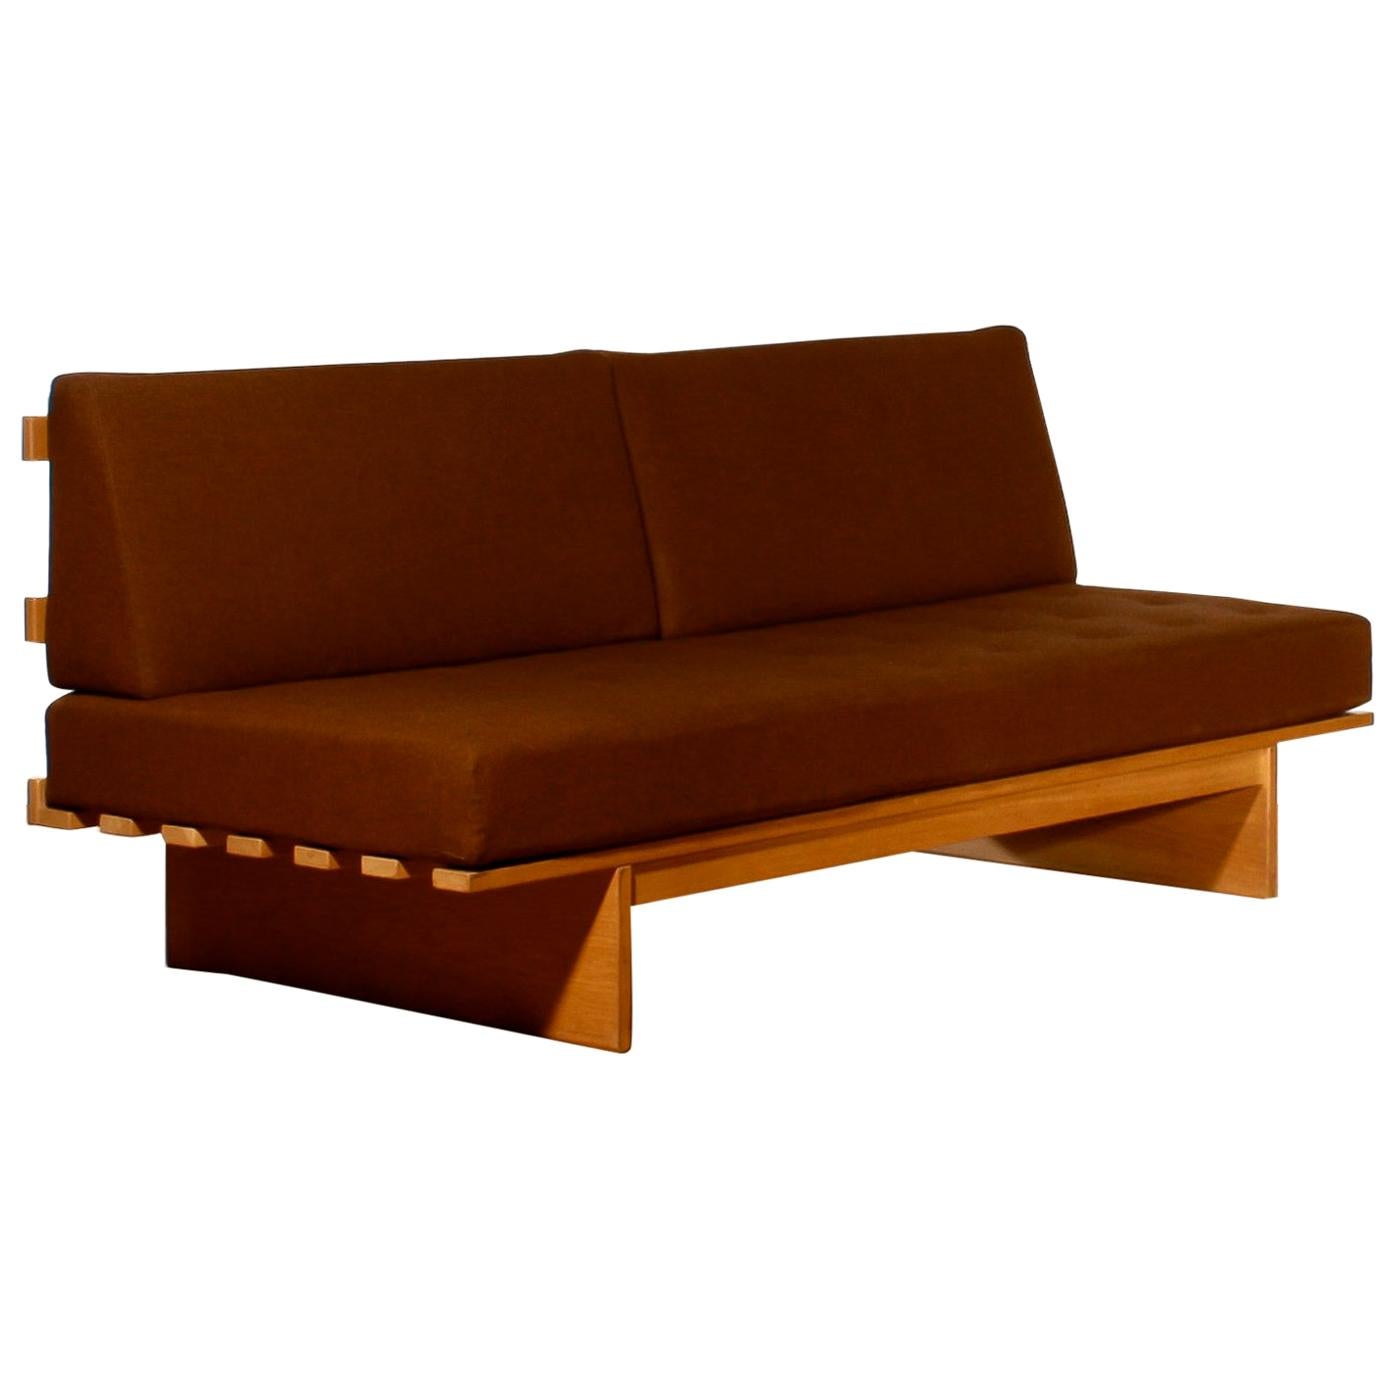 In absolute top condition sleeper or daybed in oak and dark brown wool.
The seat cushion / mattress is excellent and built with high-quality pocket springs
Overall impression is good.
Designed by Bra Bohag.
Manufactured by DUX.
Design period